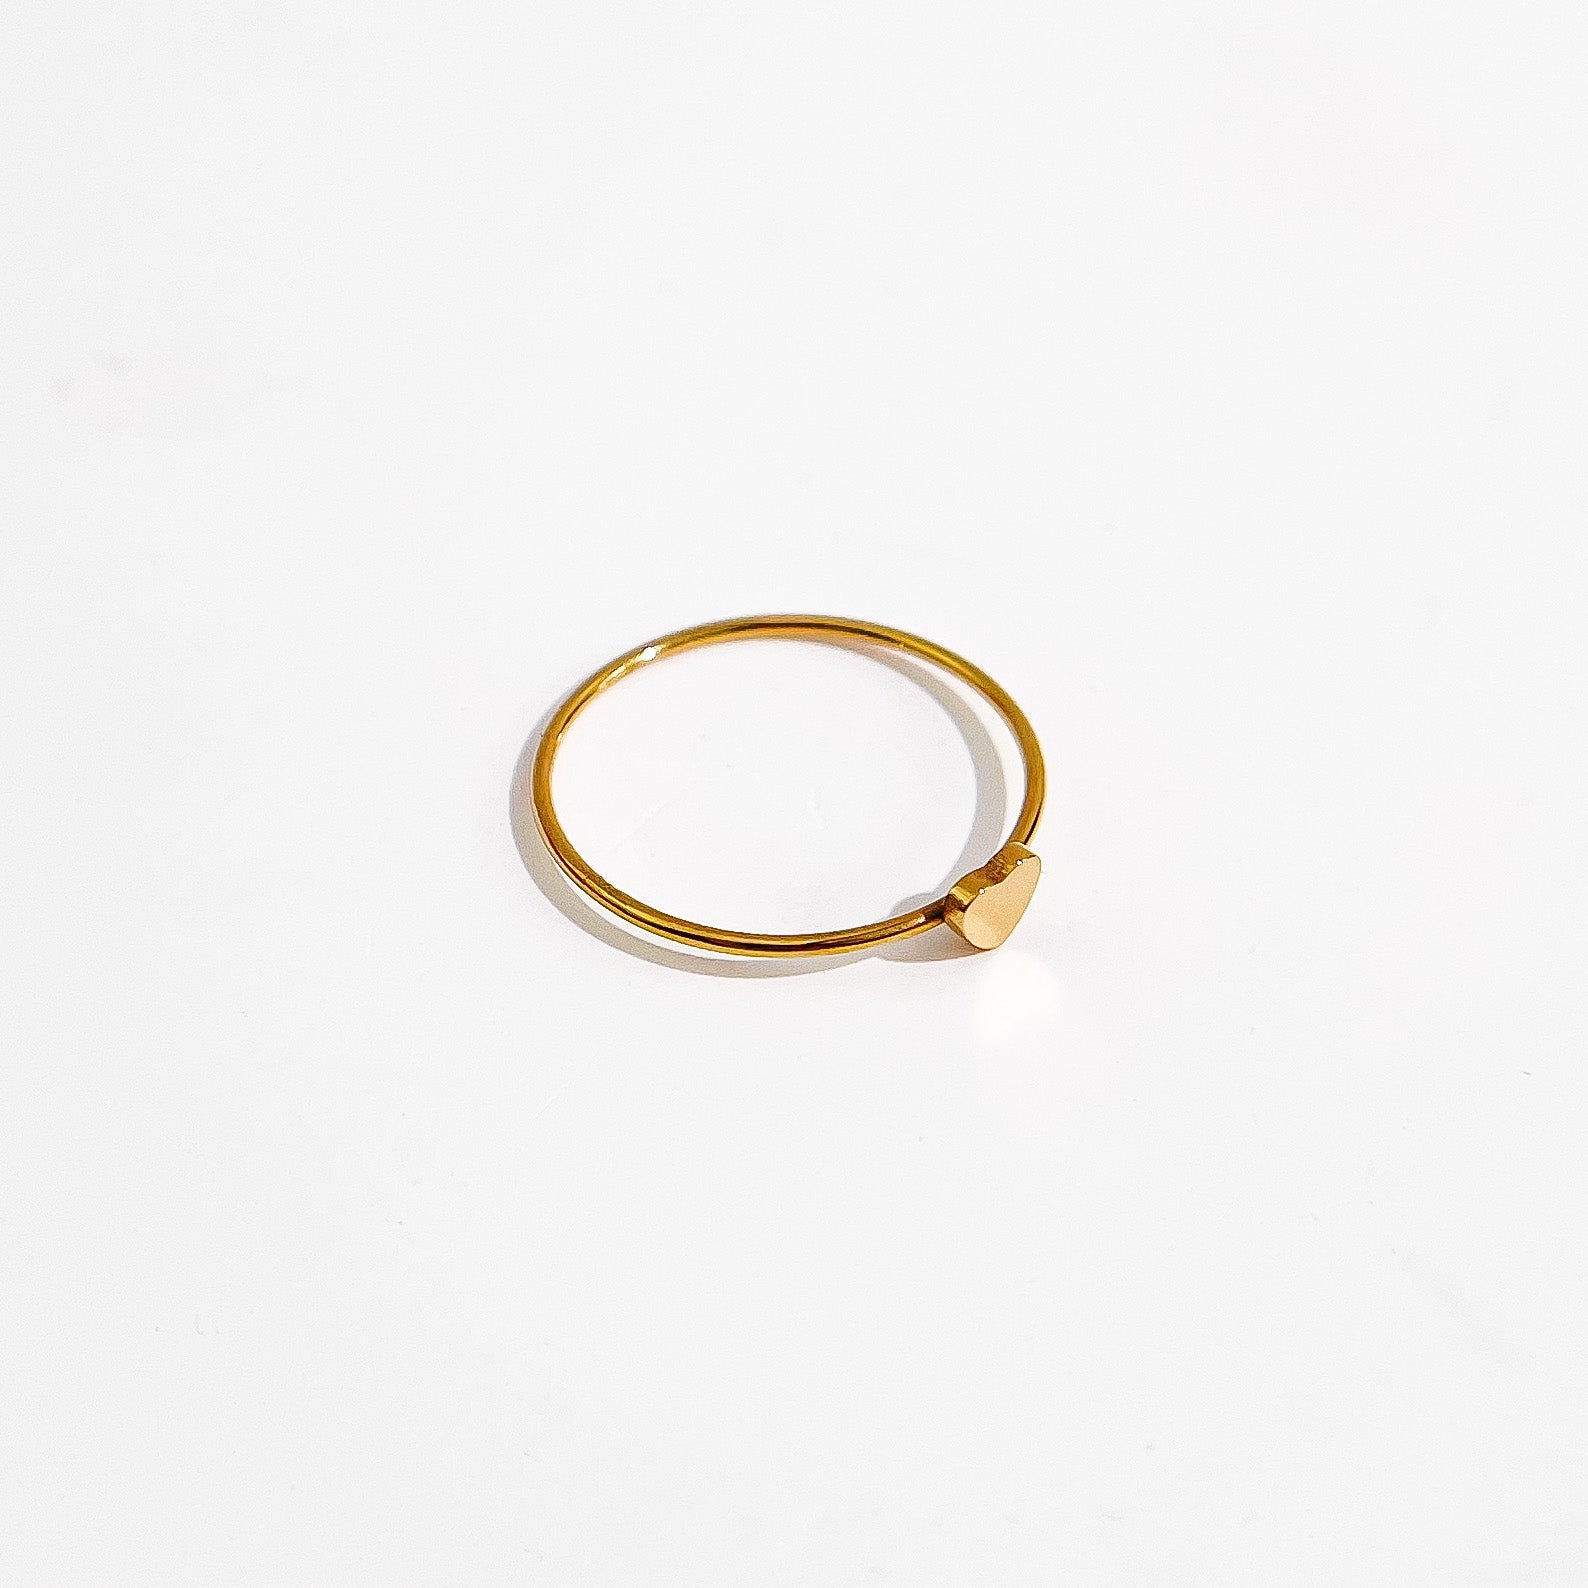 Dainty Heart Ring in Gold - Flaire & Co.